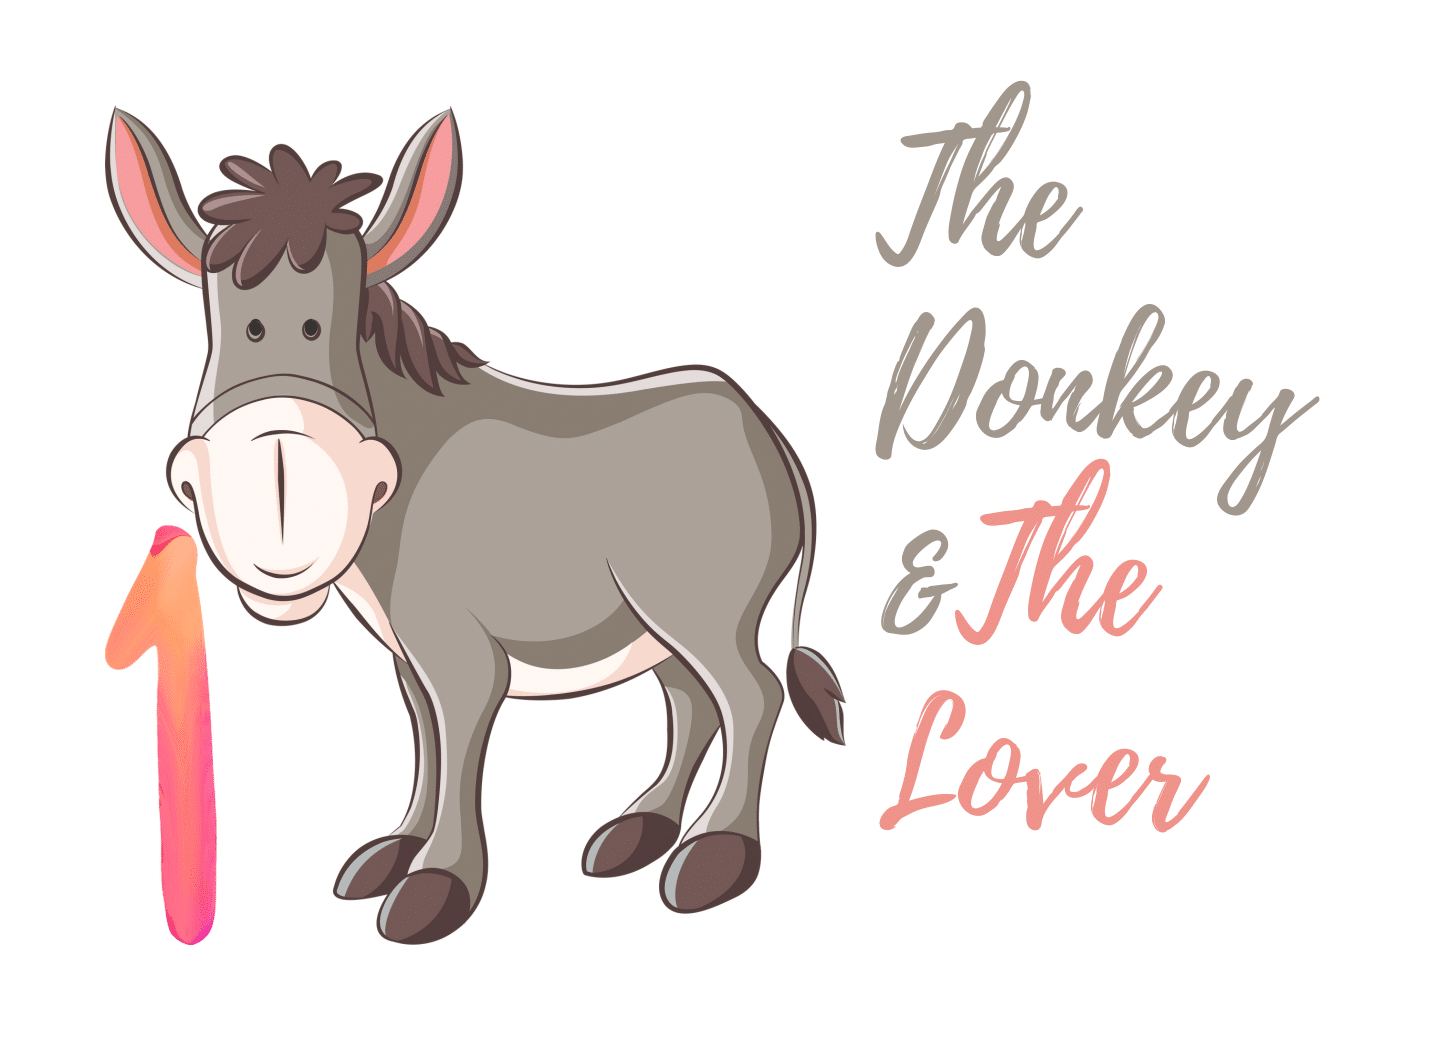 The fable of the donkey and the lover #thewritechoice 1